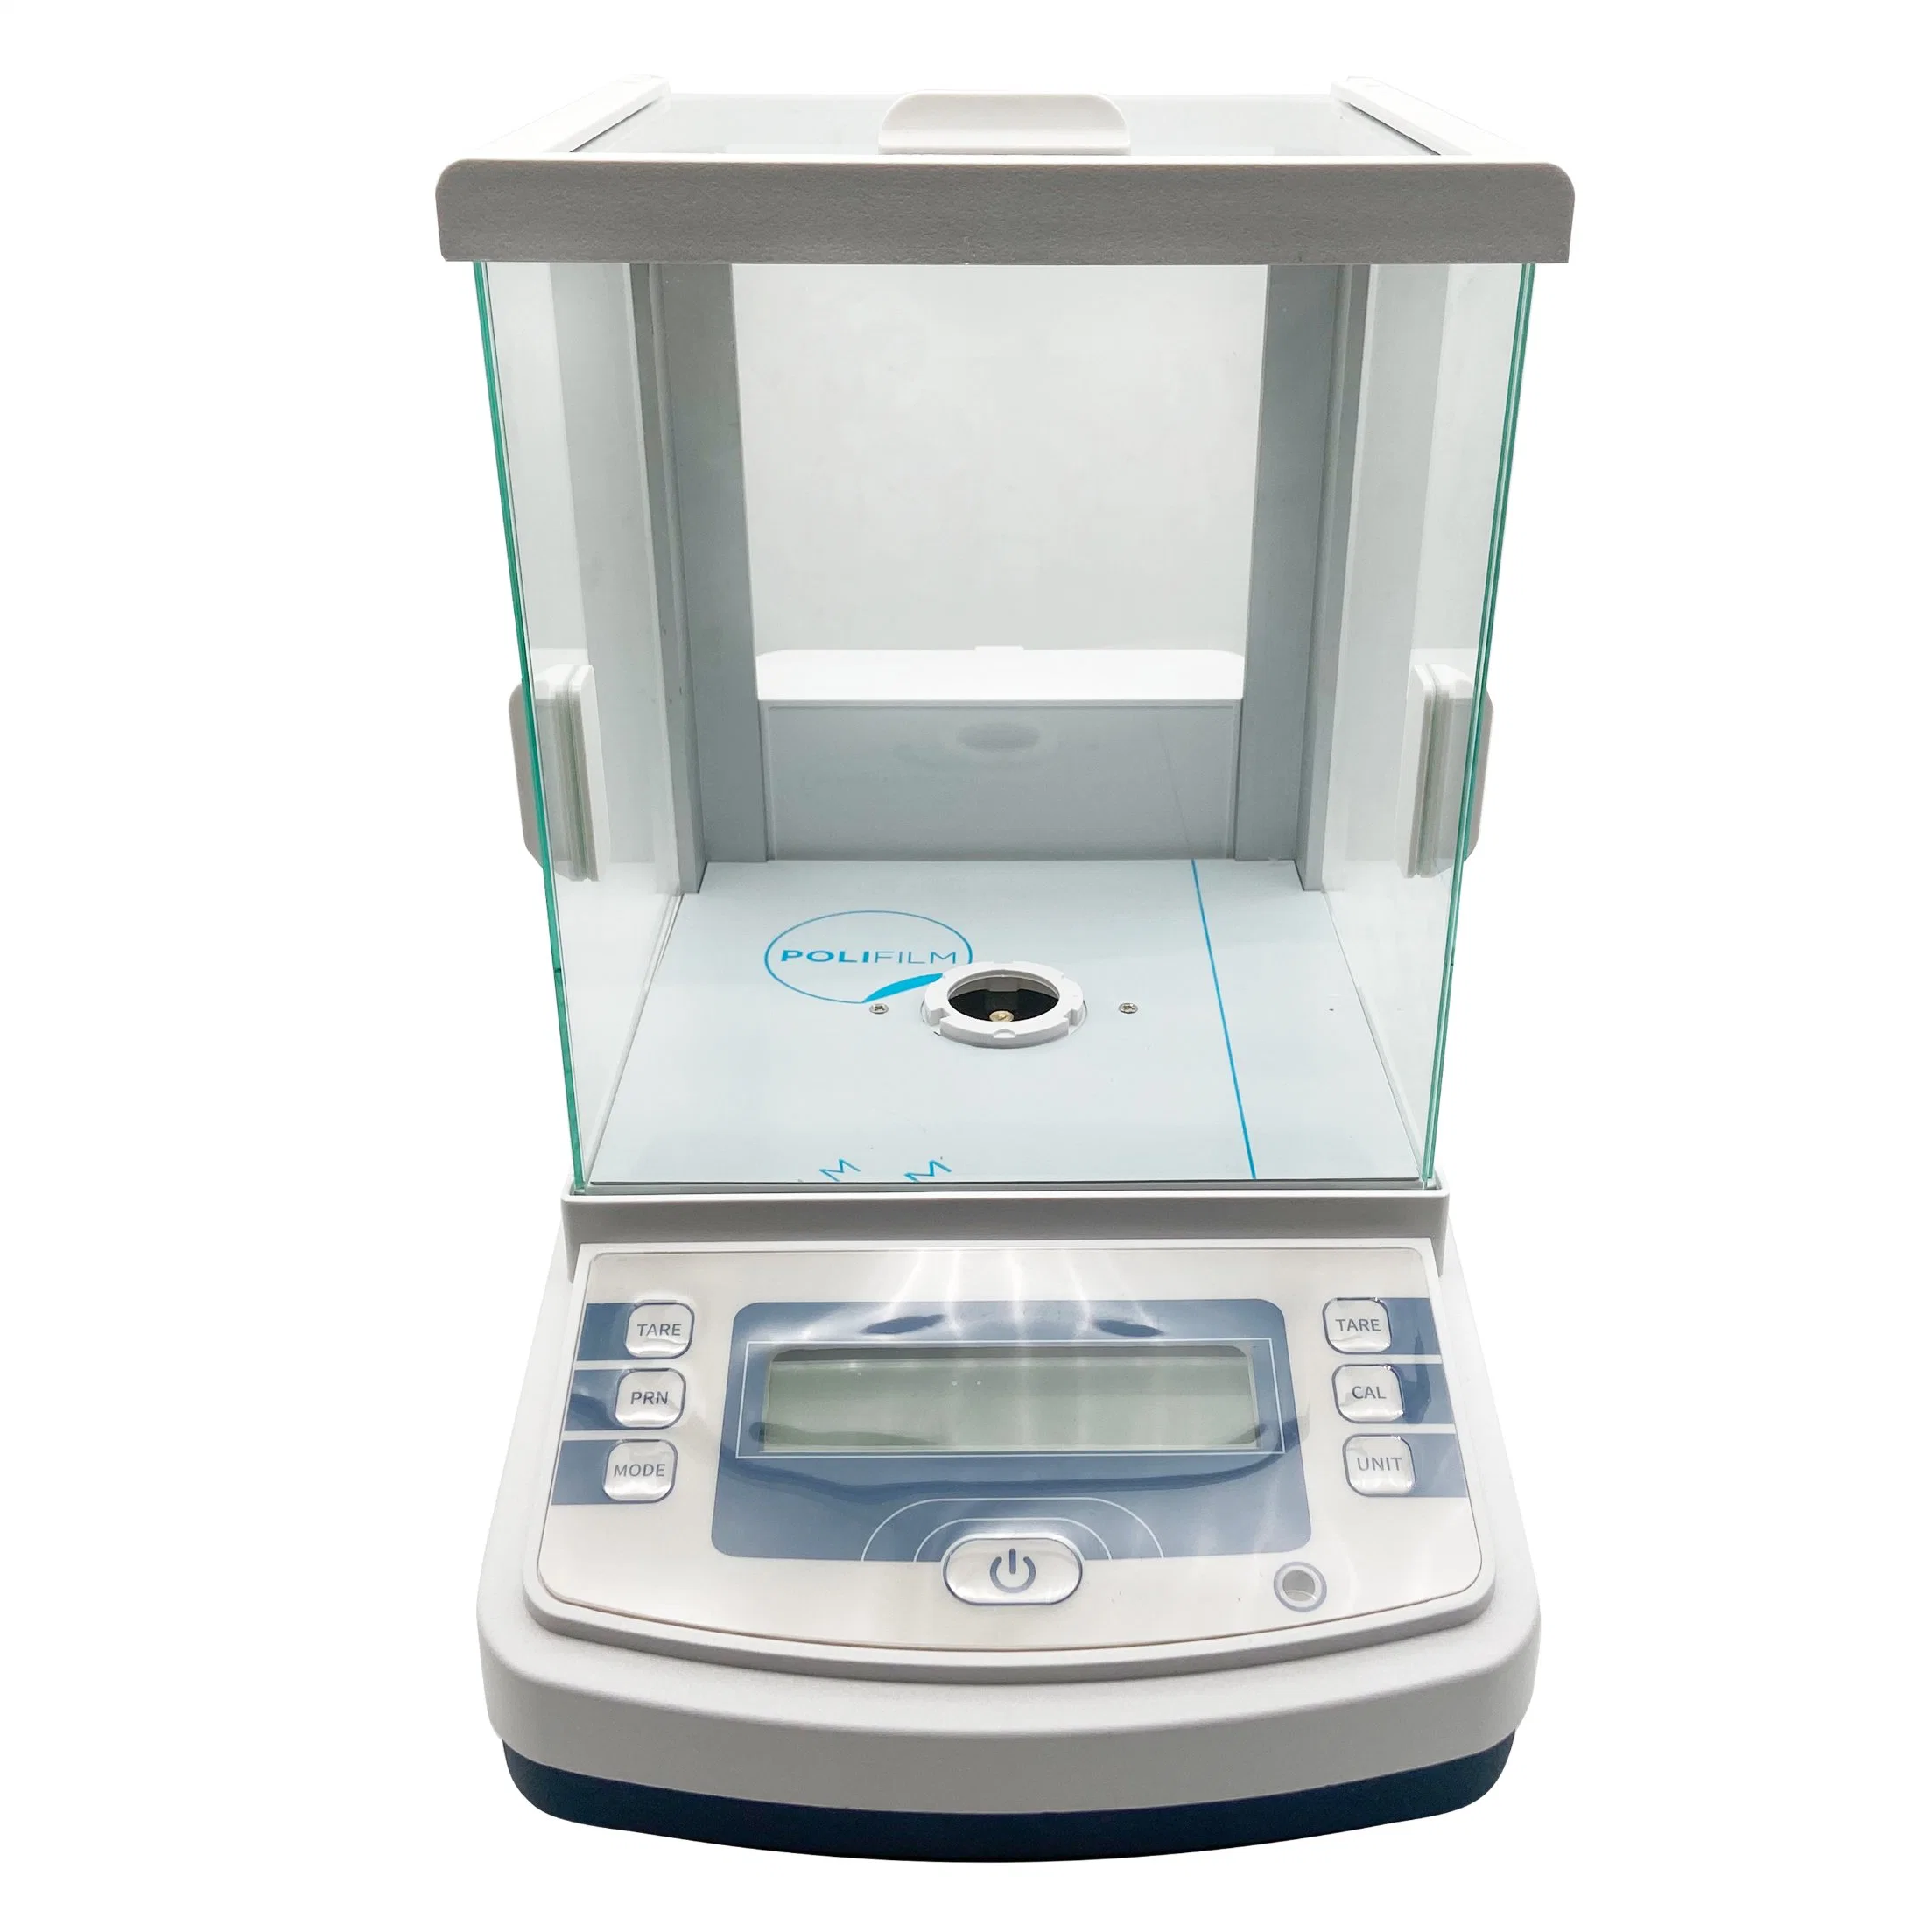 IN-FA digital lab analytical precision electronic weighing scale precision balance